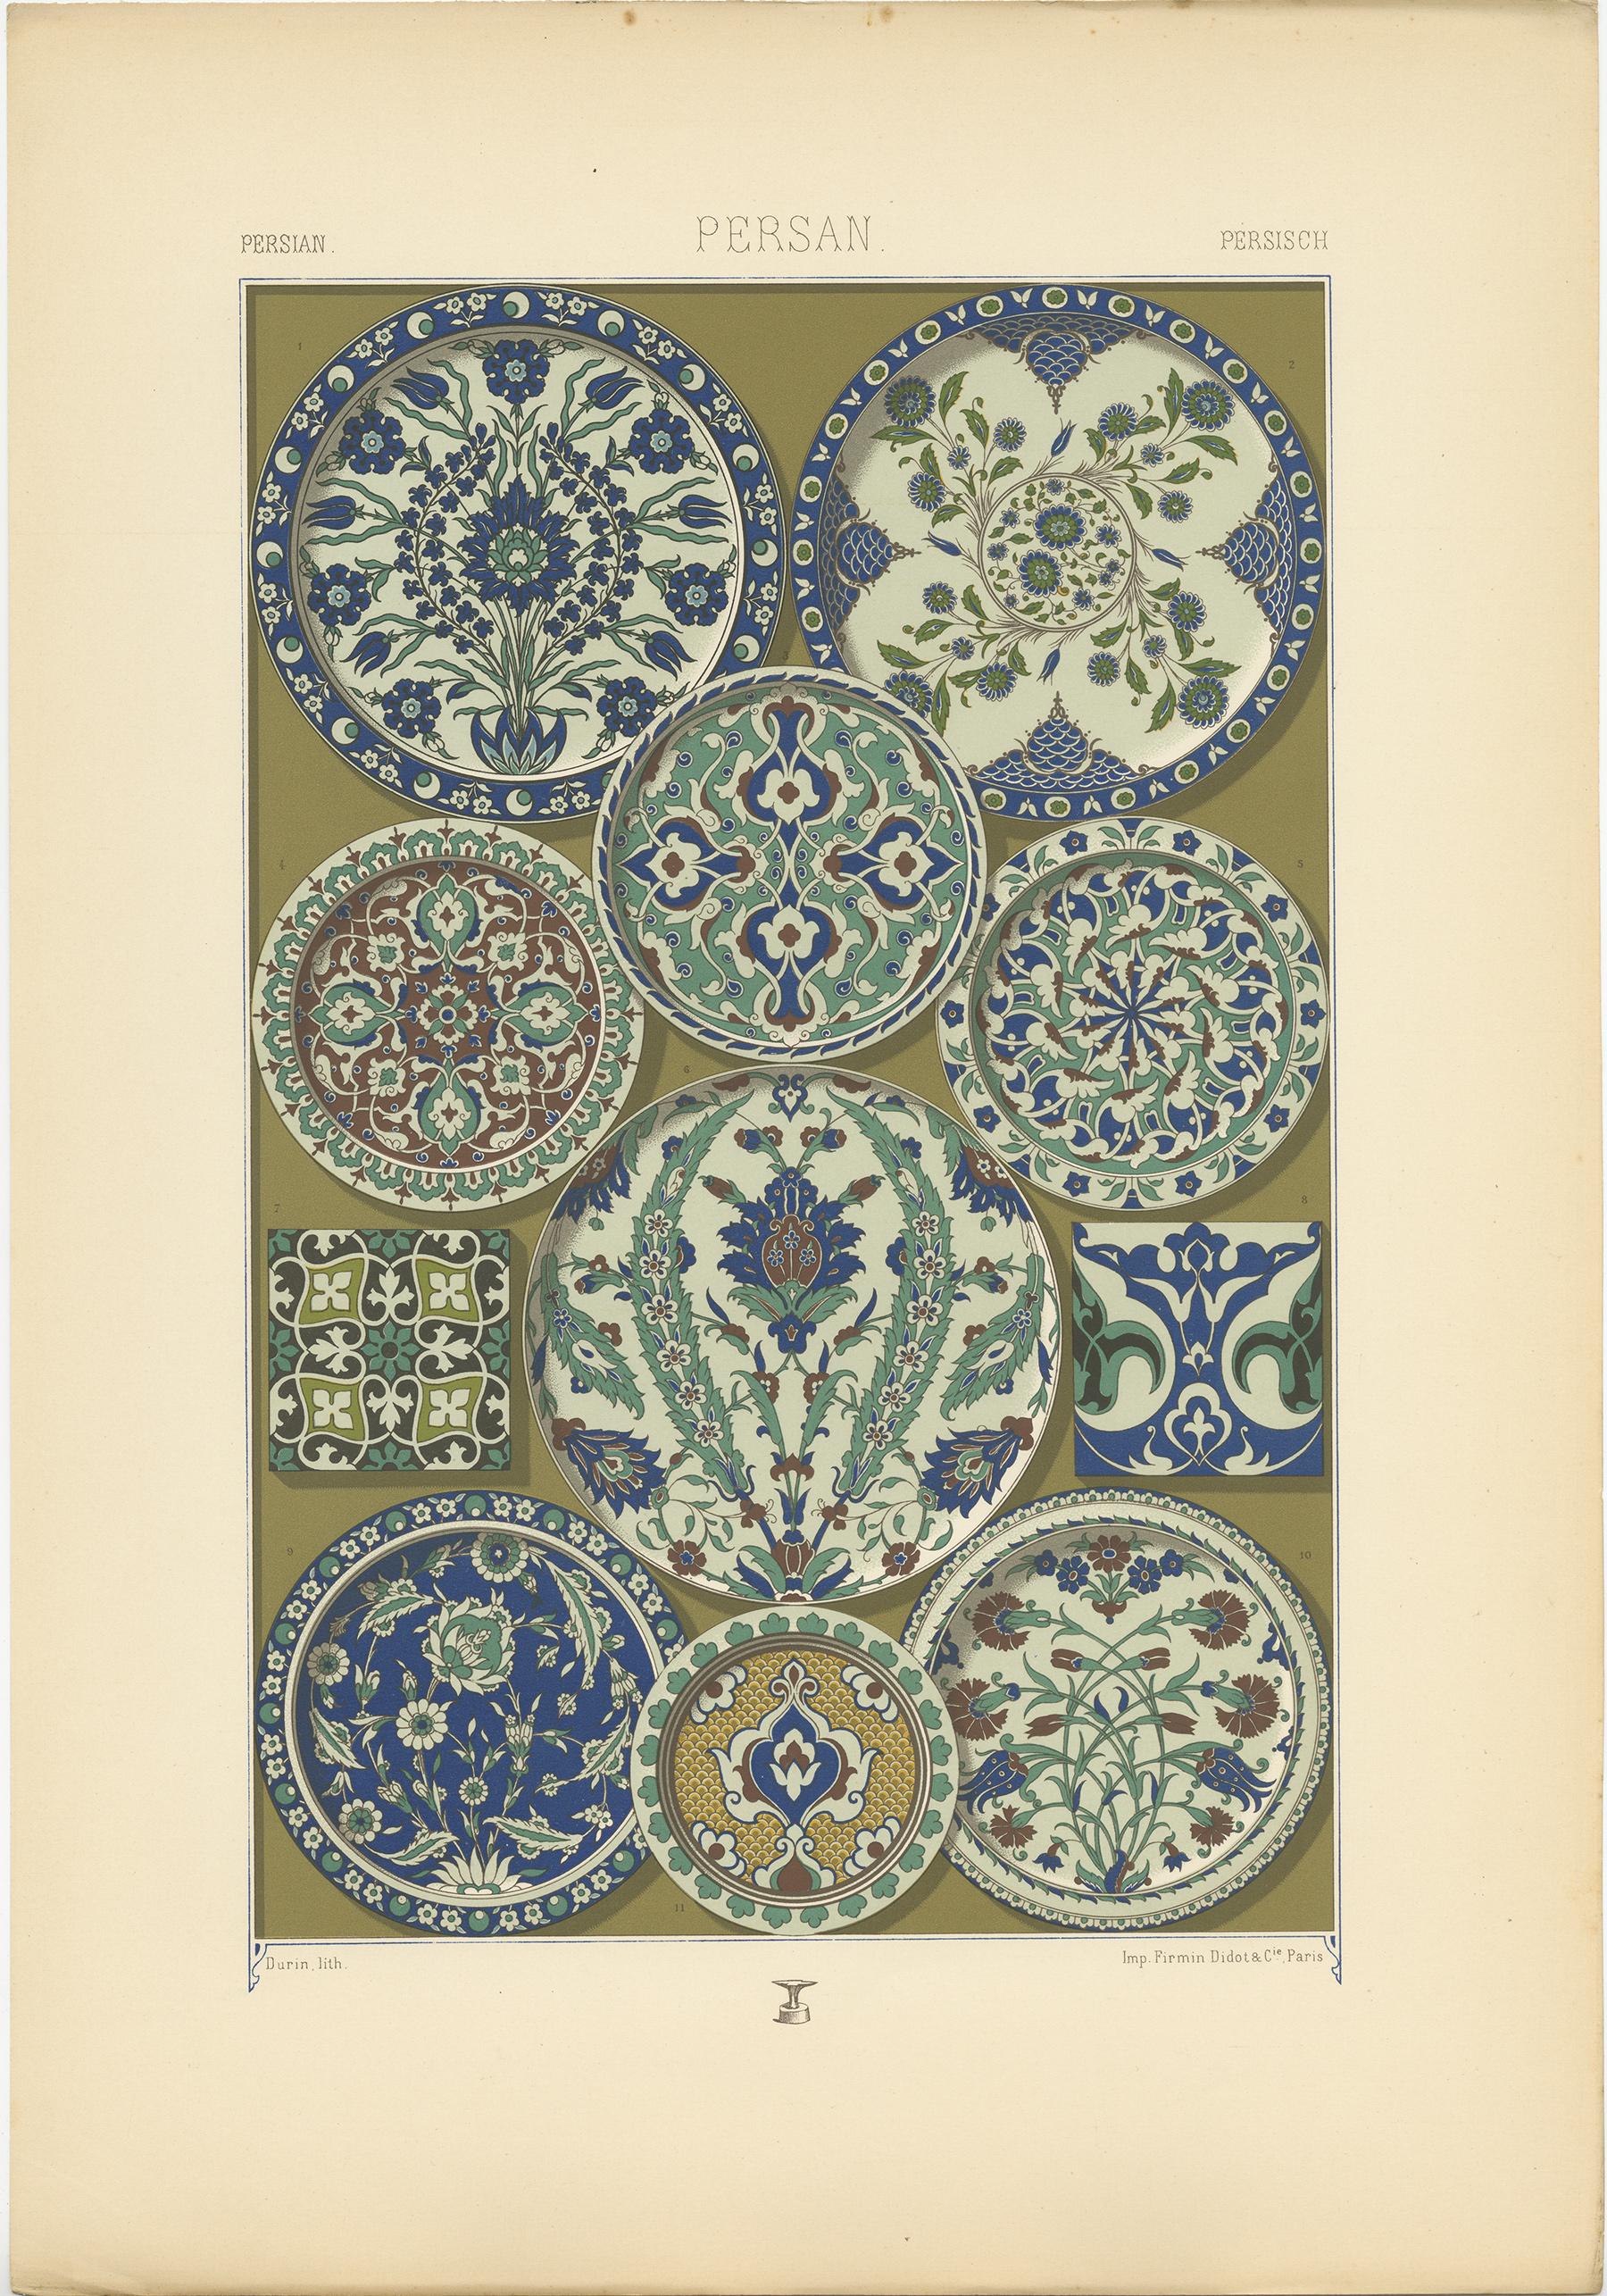 Antique print titled 'Persian - Persan - Persisch'. Chromolithograph of Enameled and glazed faience ceramics ornaments. This print originates from 'l'Ornement Polychrome' by Auguste Racinet. Published circa 1890.